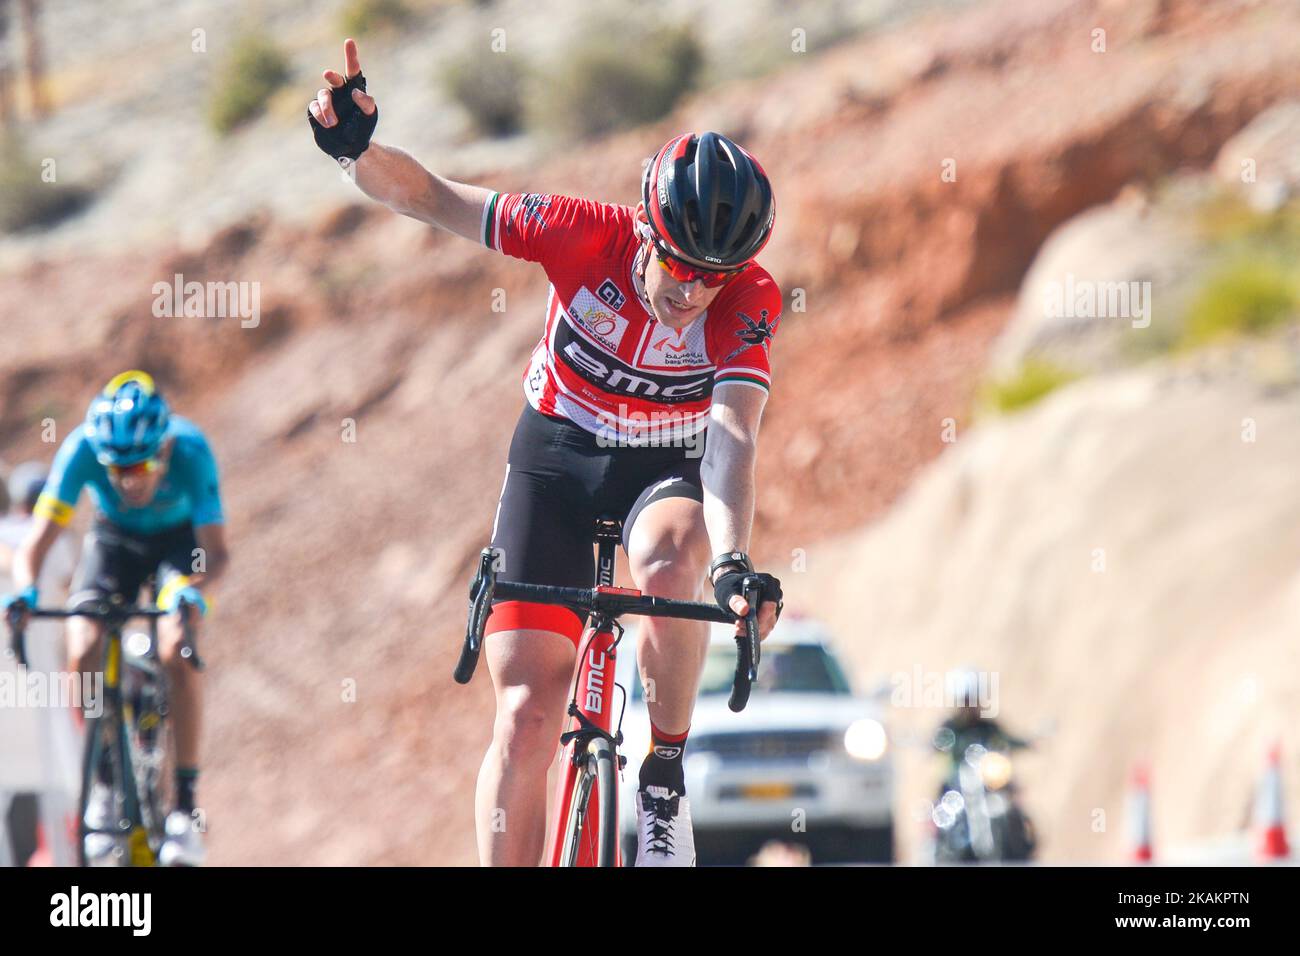 Ben HERMANS from BMC Racing Team, wins the fifth stage, a 152.5km from Sama'il to Jabal Al Akhdhar (Green Mountain), at the 2017 cycling Tour of Oman. On Saturday, February 18, 2017, in Jabal Al Akhdhar, Ad Dakhiliyah Region, Oman. Photo by Artur Widak *** Please Use Credit from Credit Field ***  Stock Photo